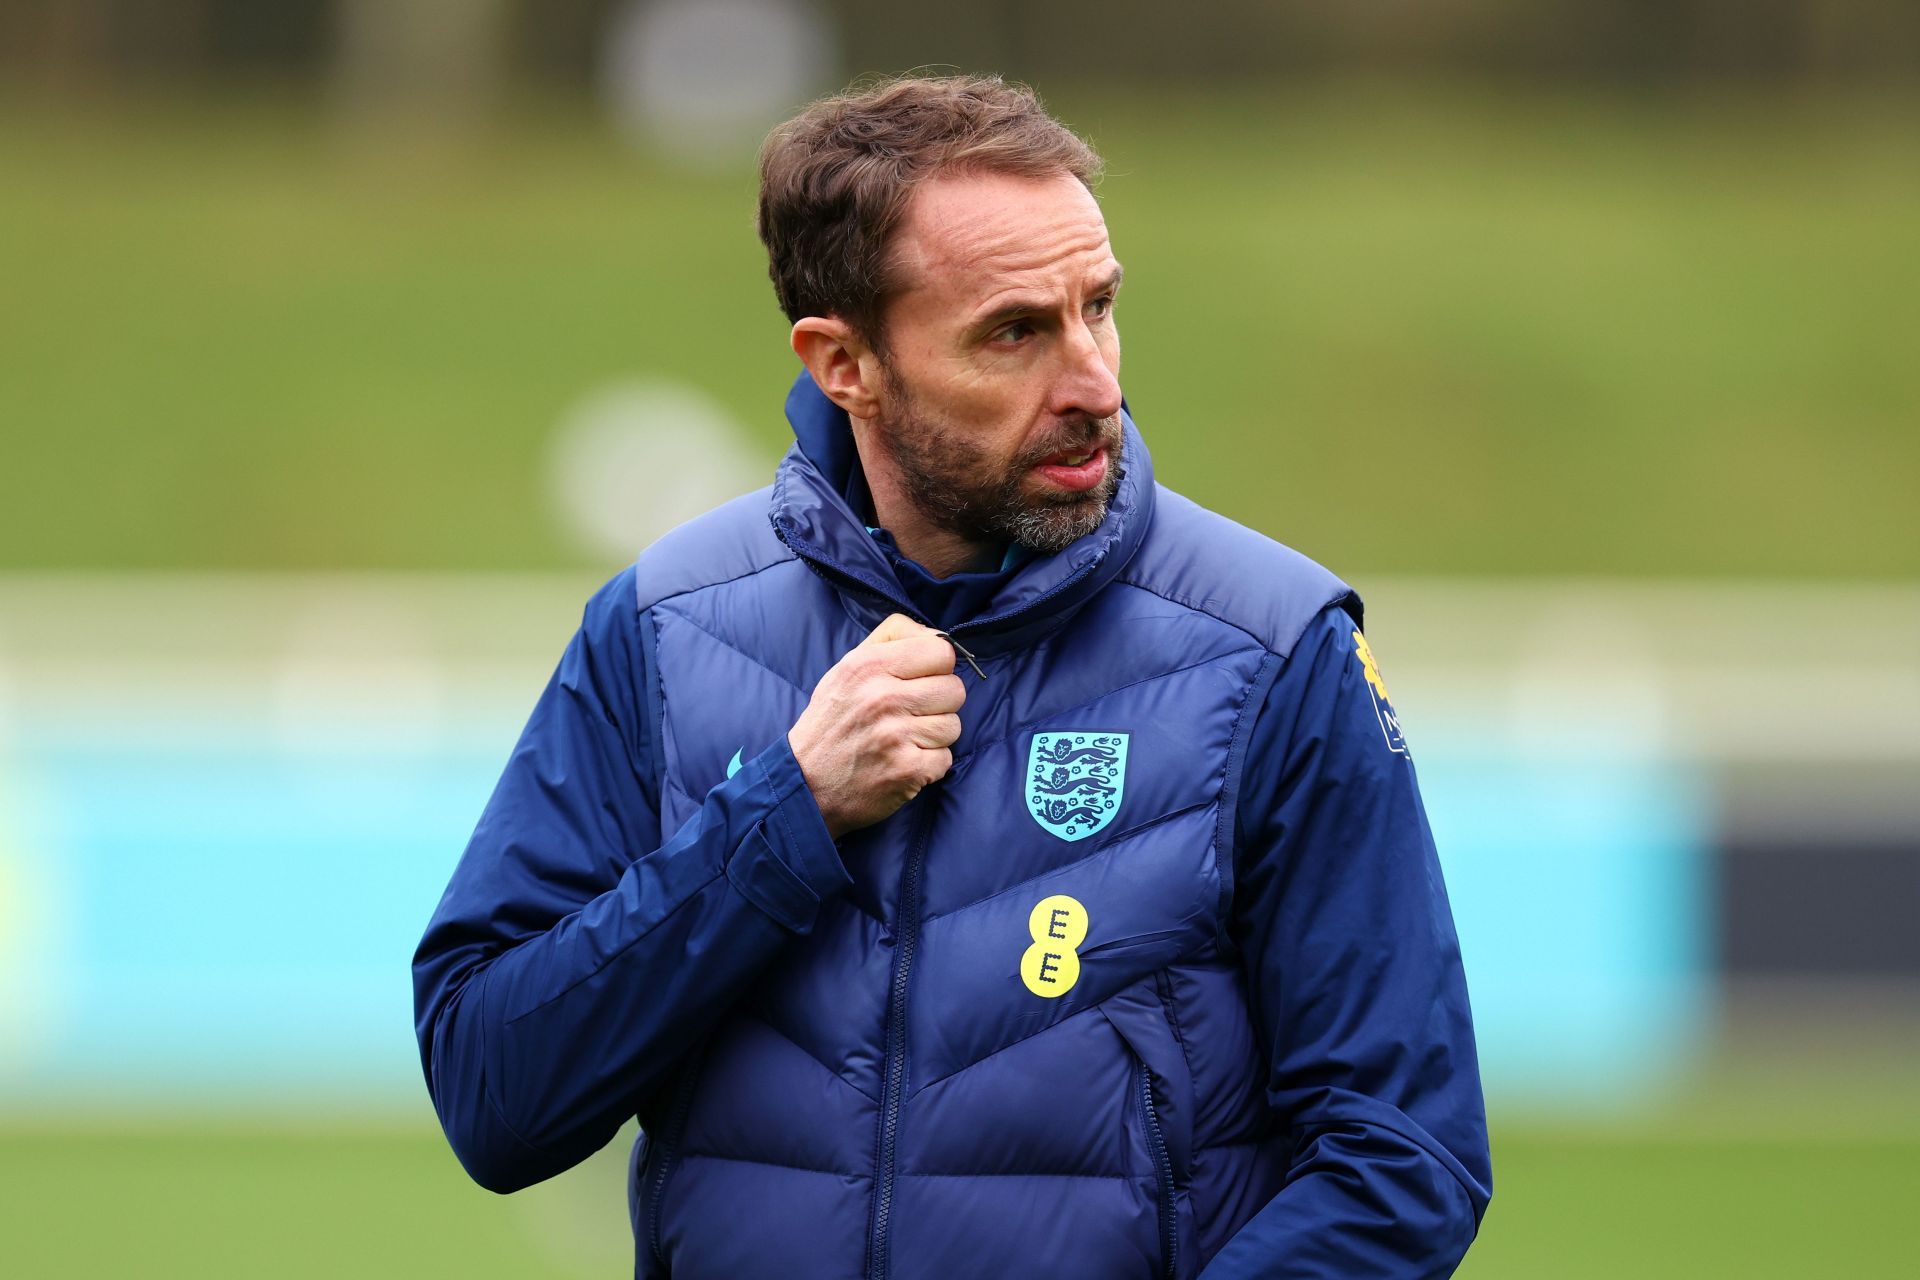 Gareth Southgate has told Aaron Ramsdale he needs game time.